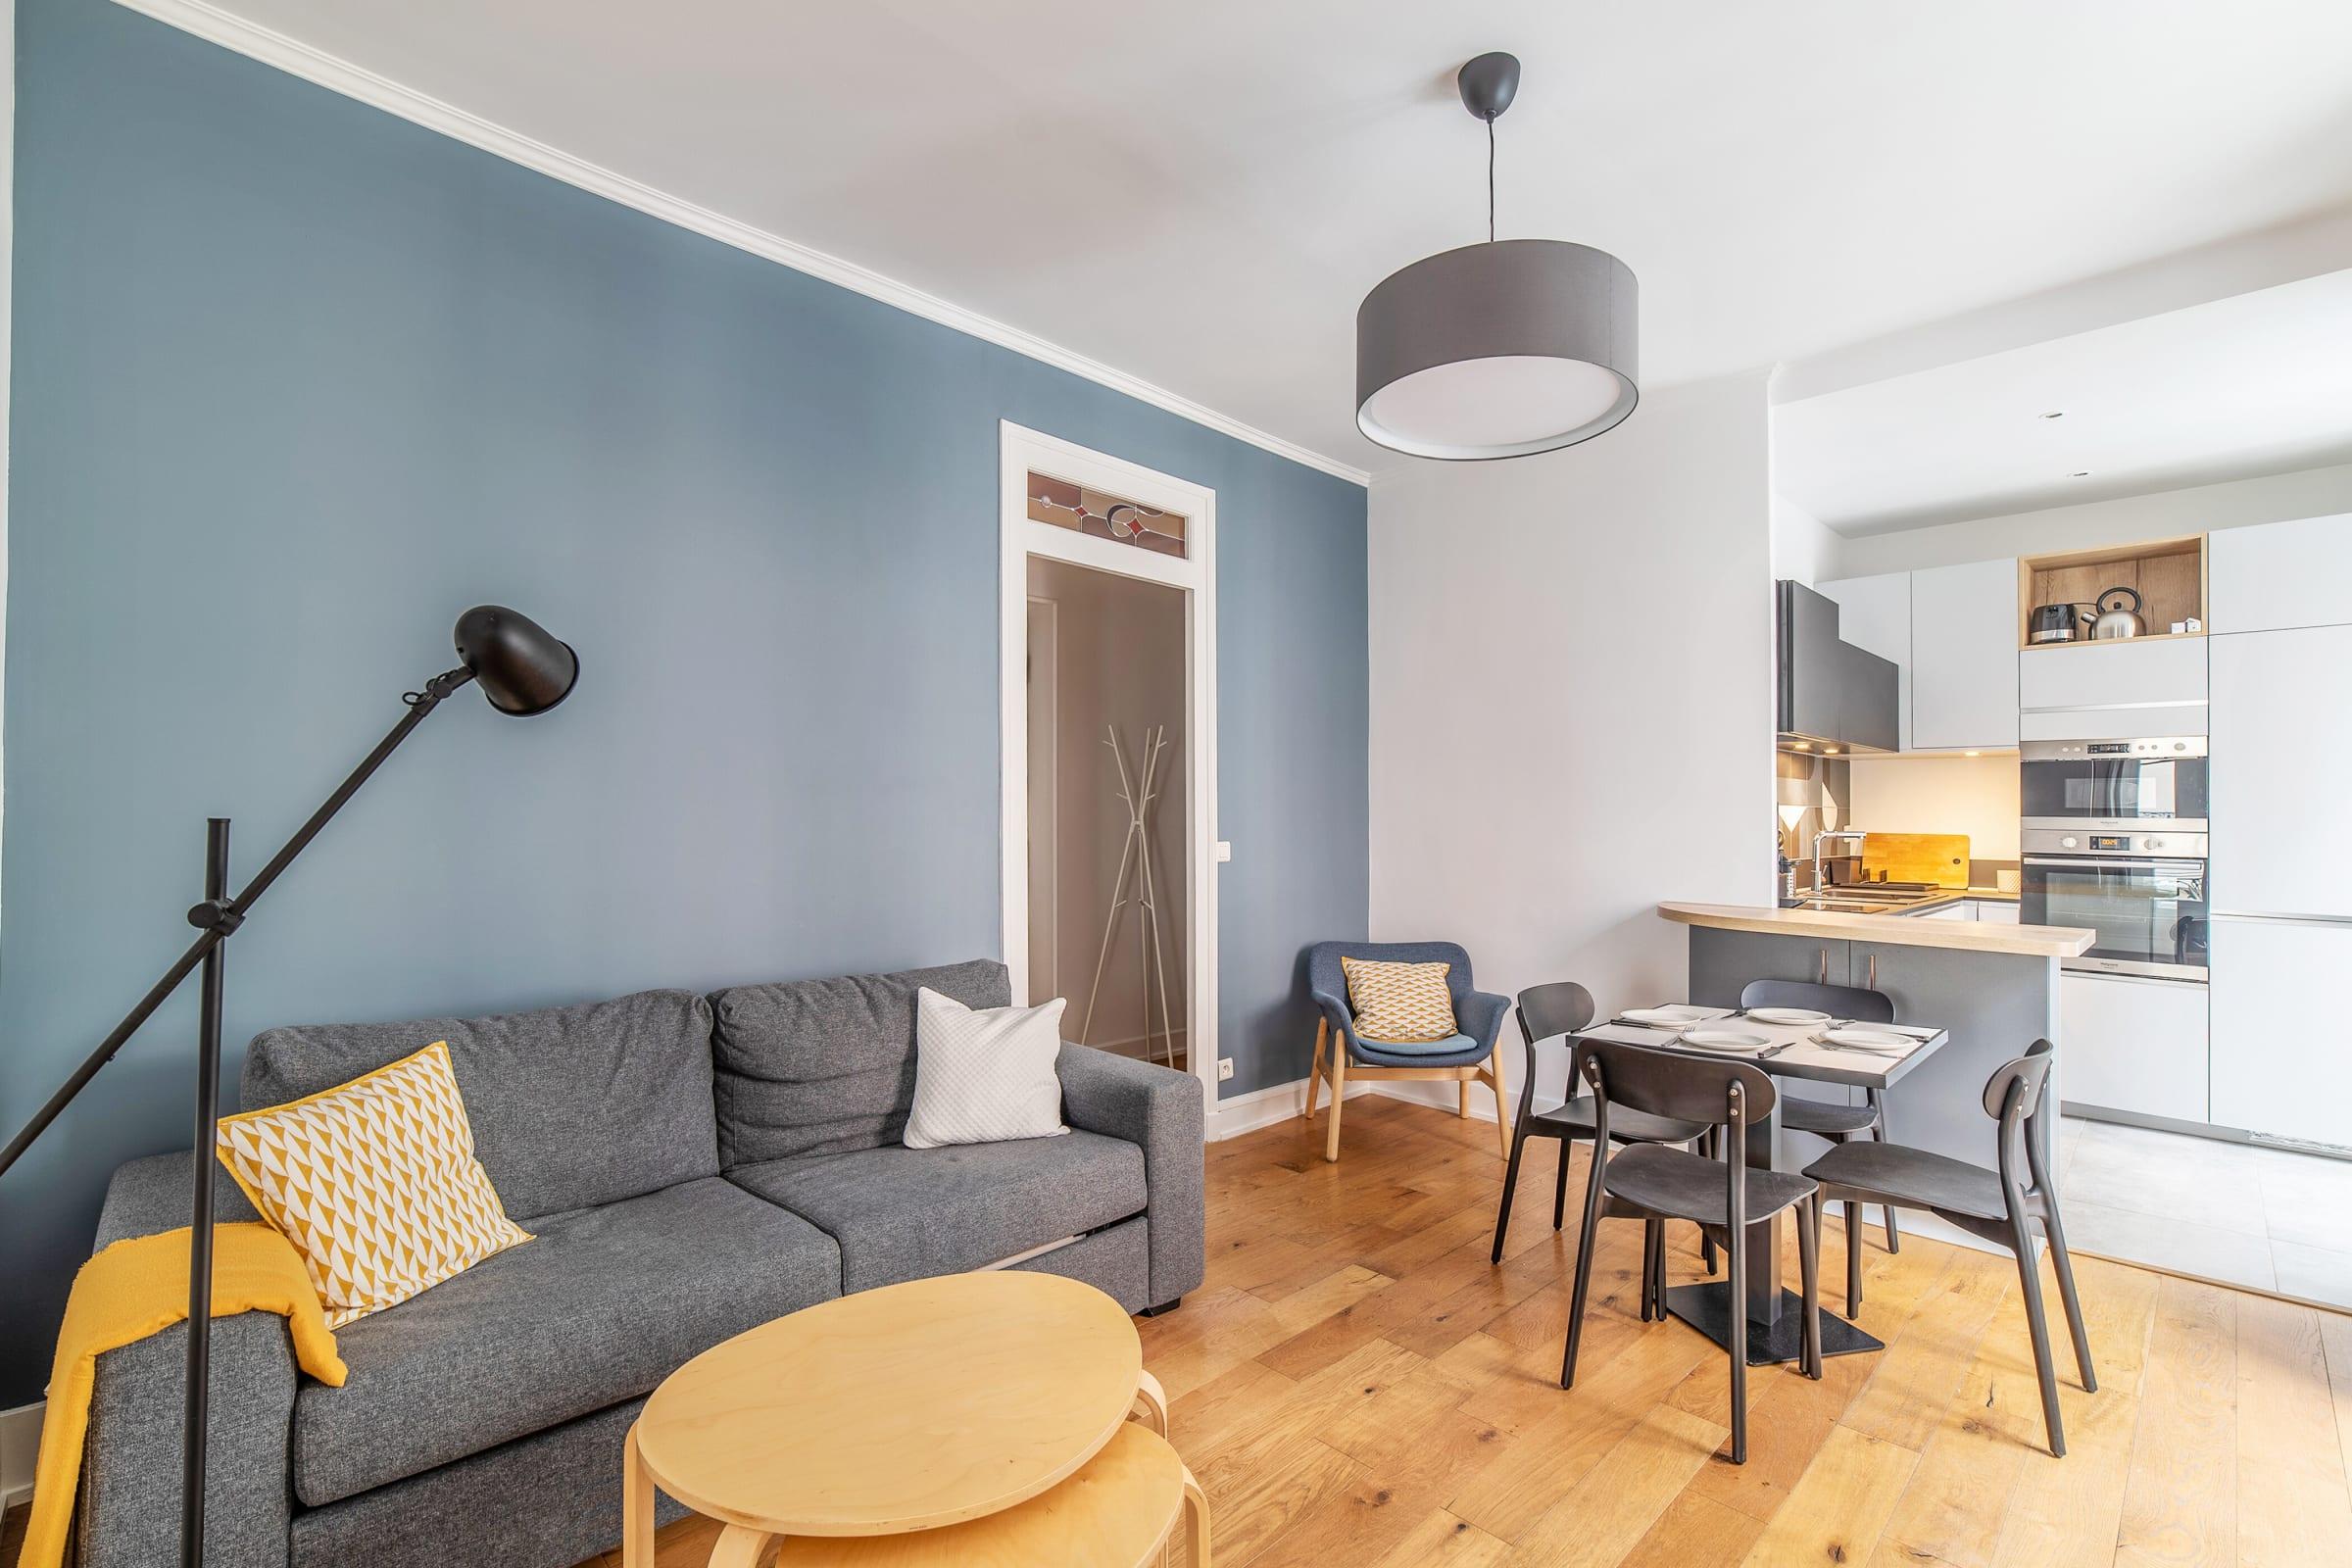 Property Image 2 - Modern apartment at the heart of Brotteaux in Lyon